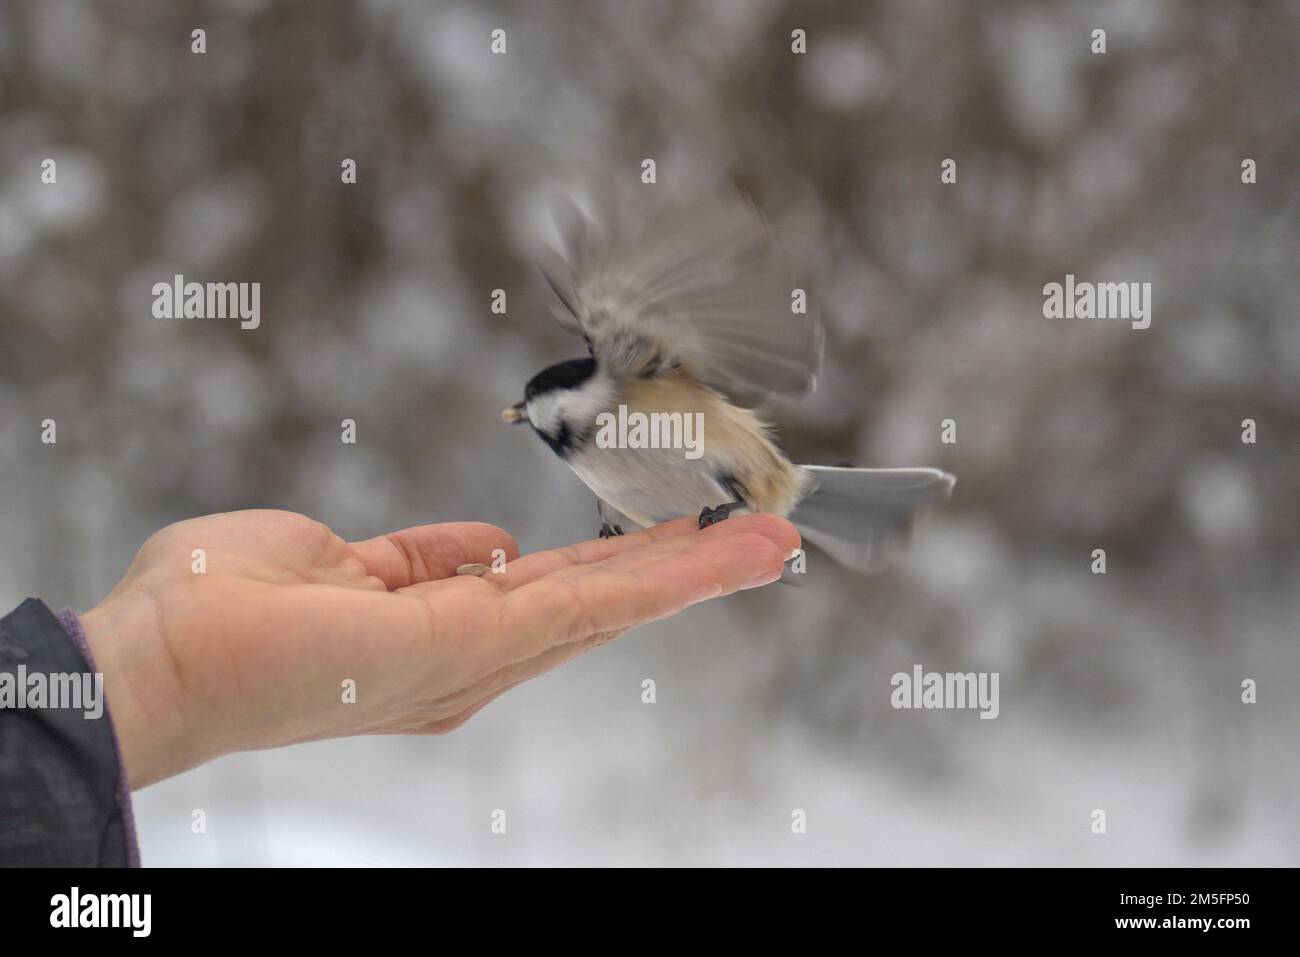 Black-capped chickadee (Poecile atricapillus) landing on a hand on a very cold and snowy hiking trail near Ottawa, Ontario, Canada. Stock Photo